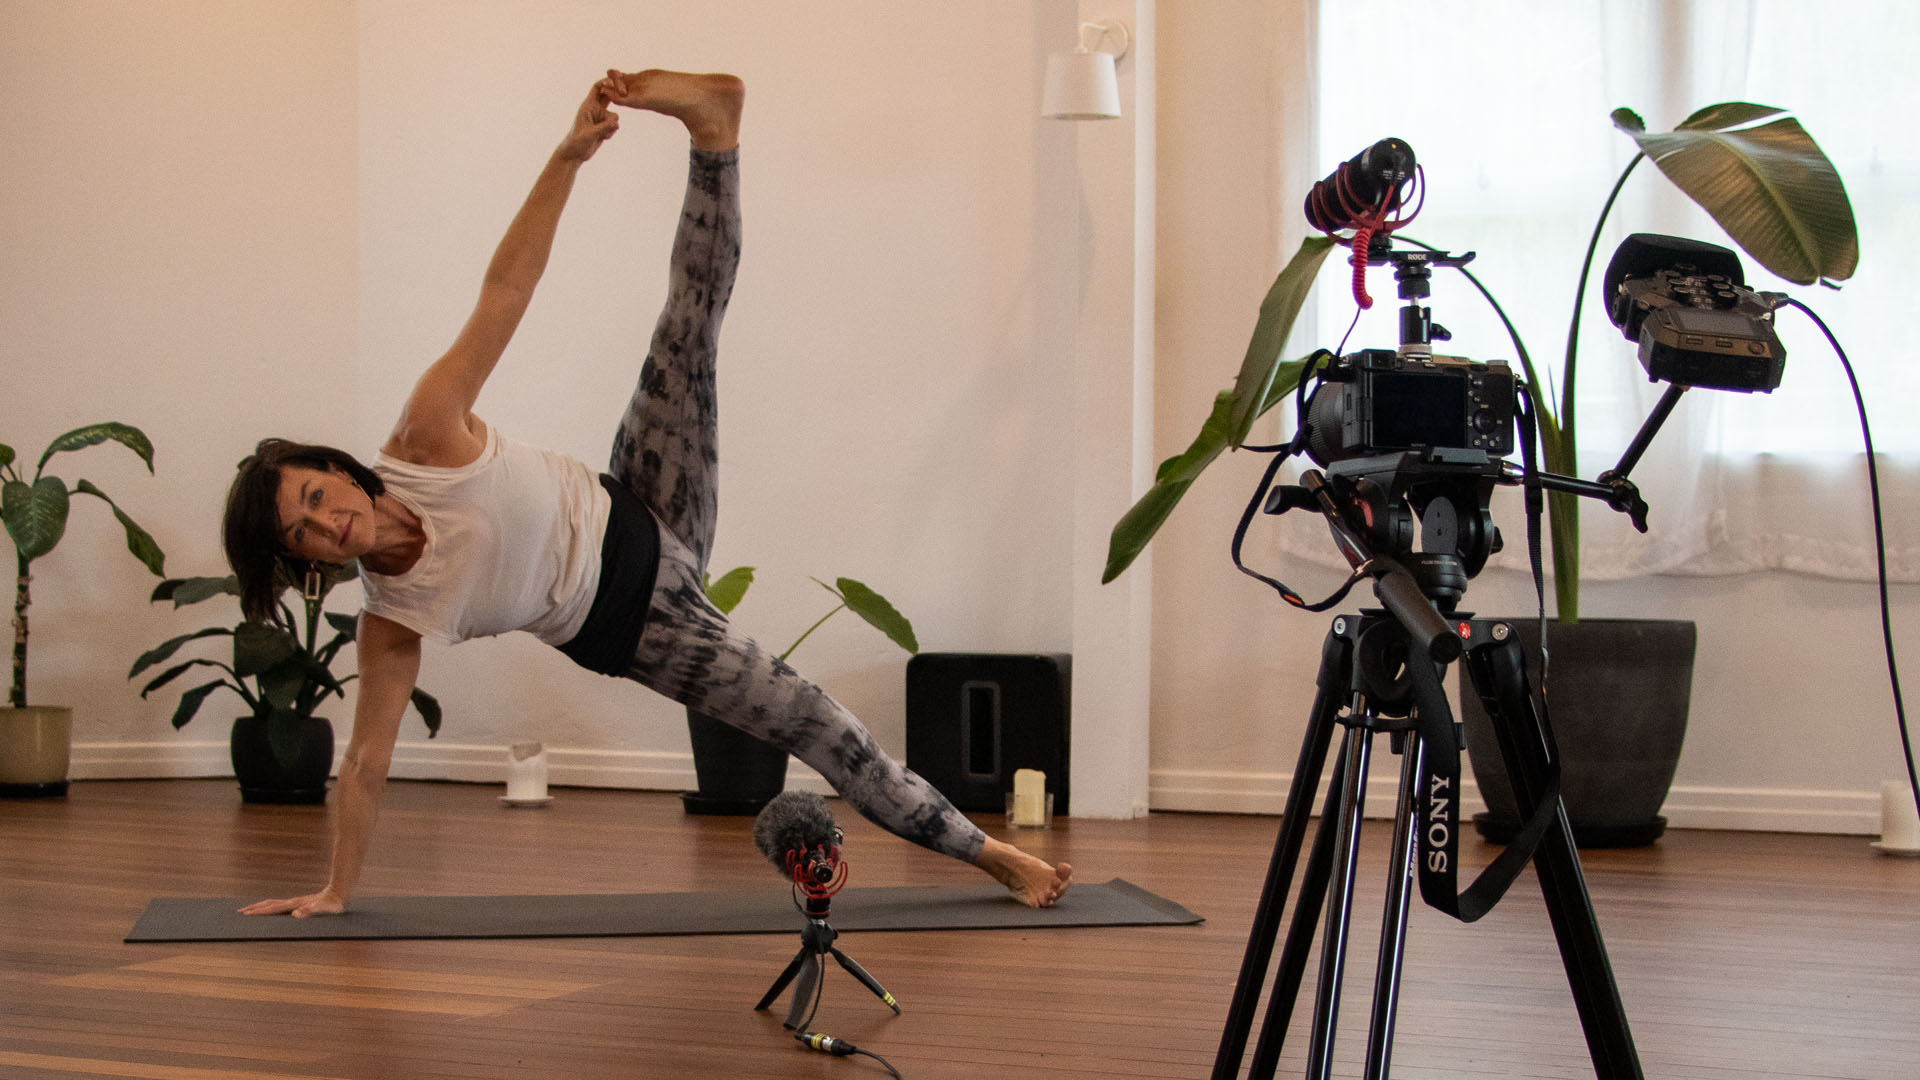 Debby Lewis demonstrating yoga pose in front of a camera and microphone in yoga studio